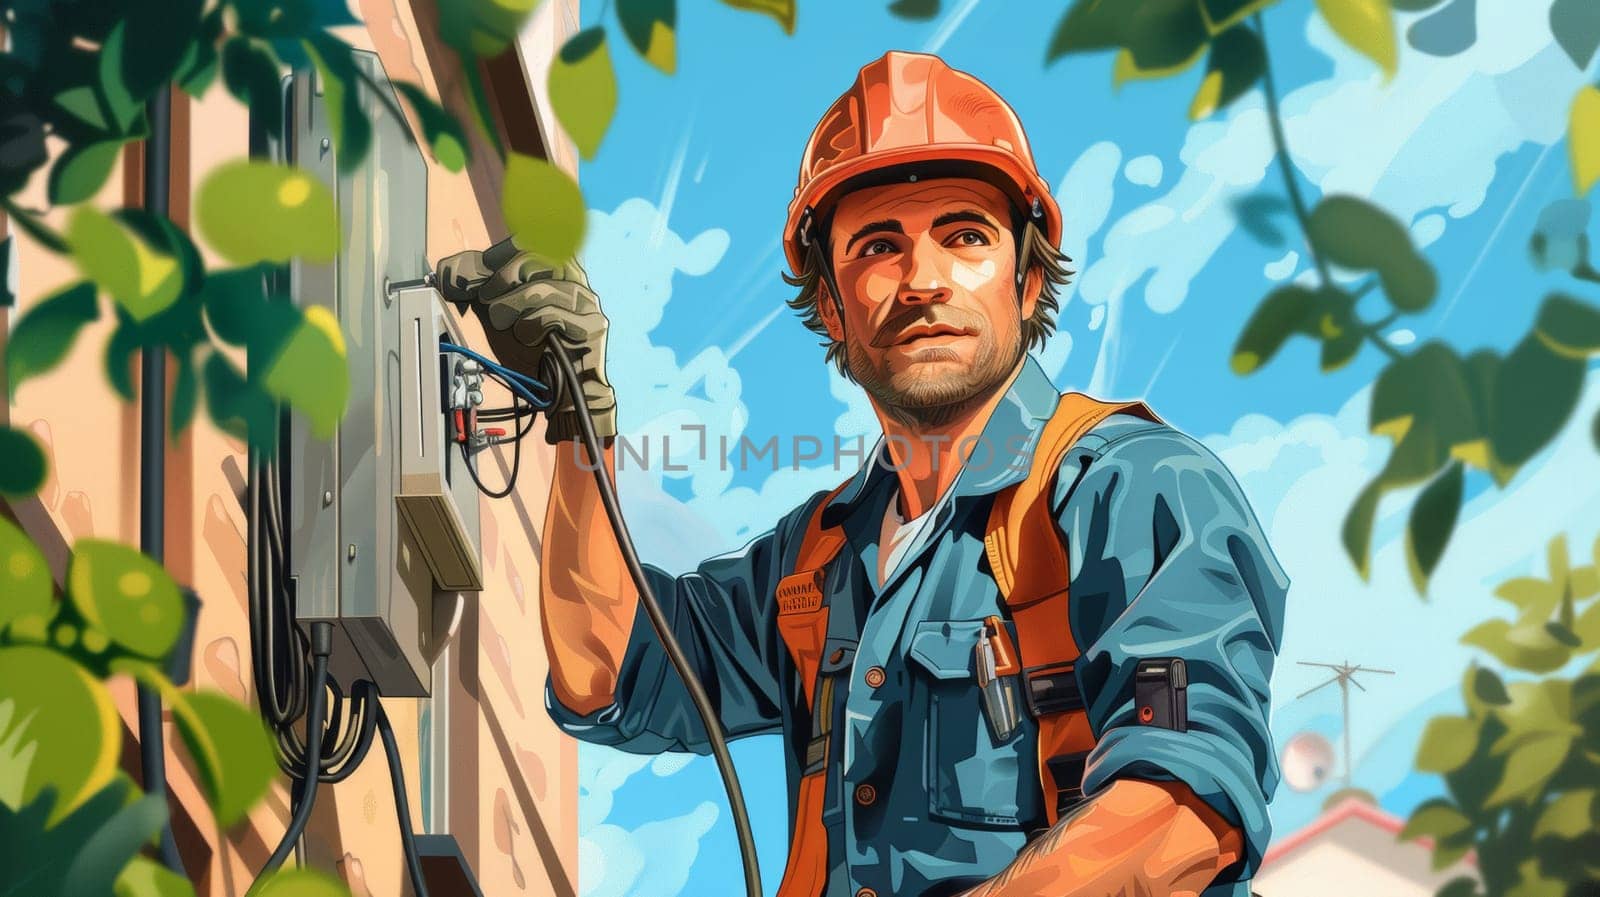 A painting of a man in an orange hard hat working on the side of a house